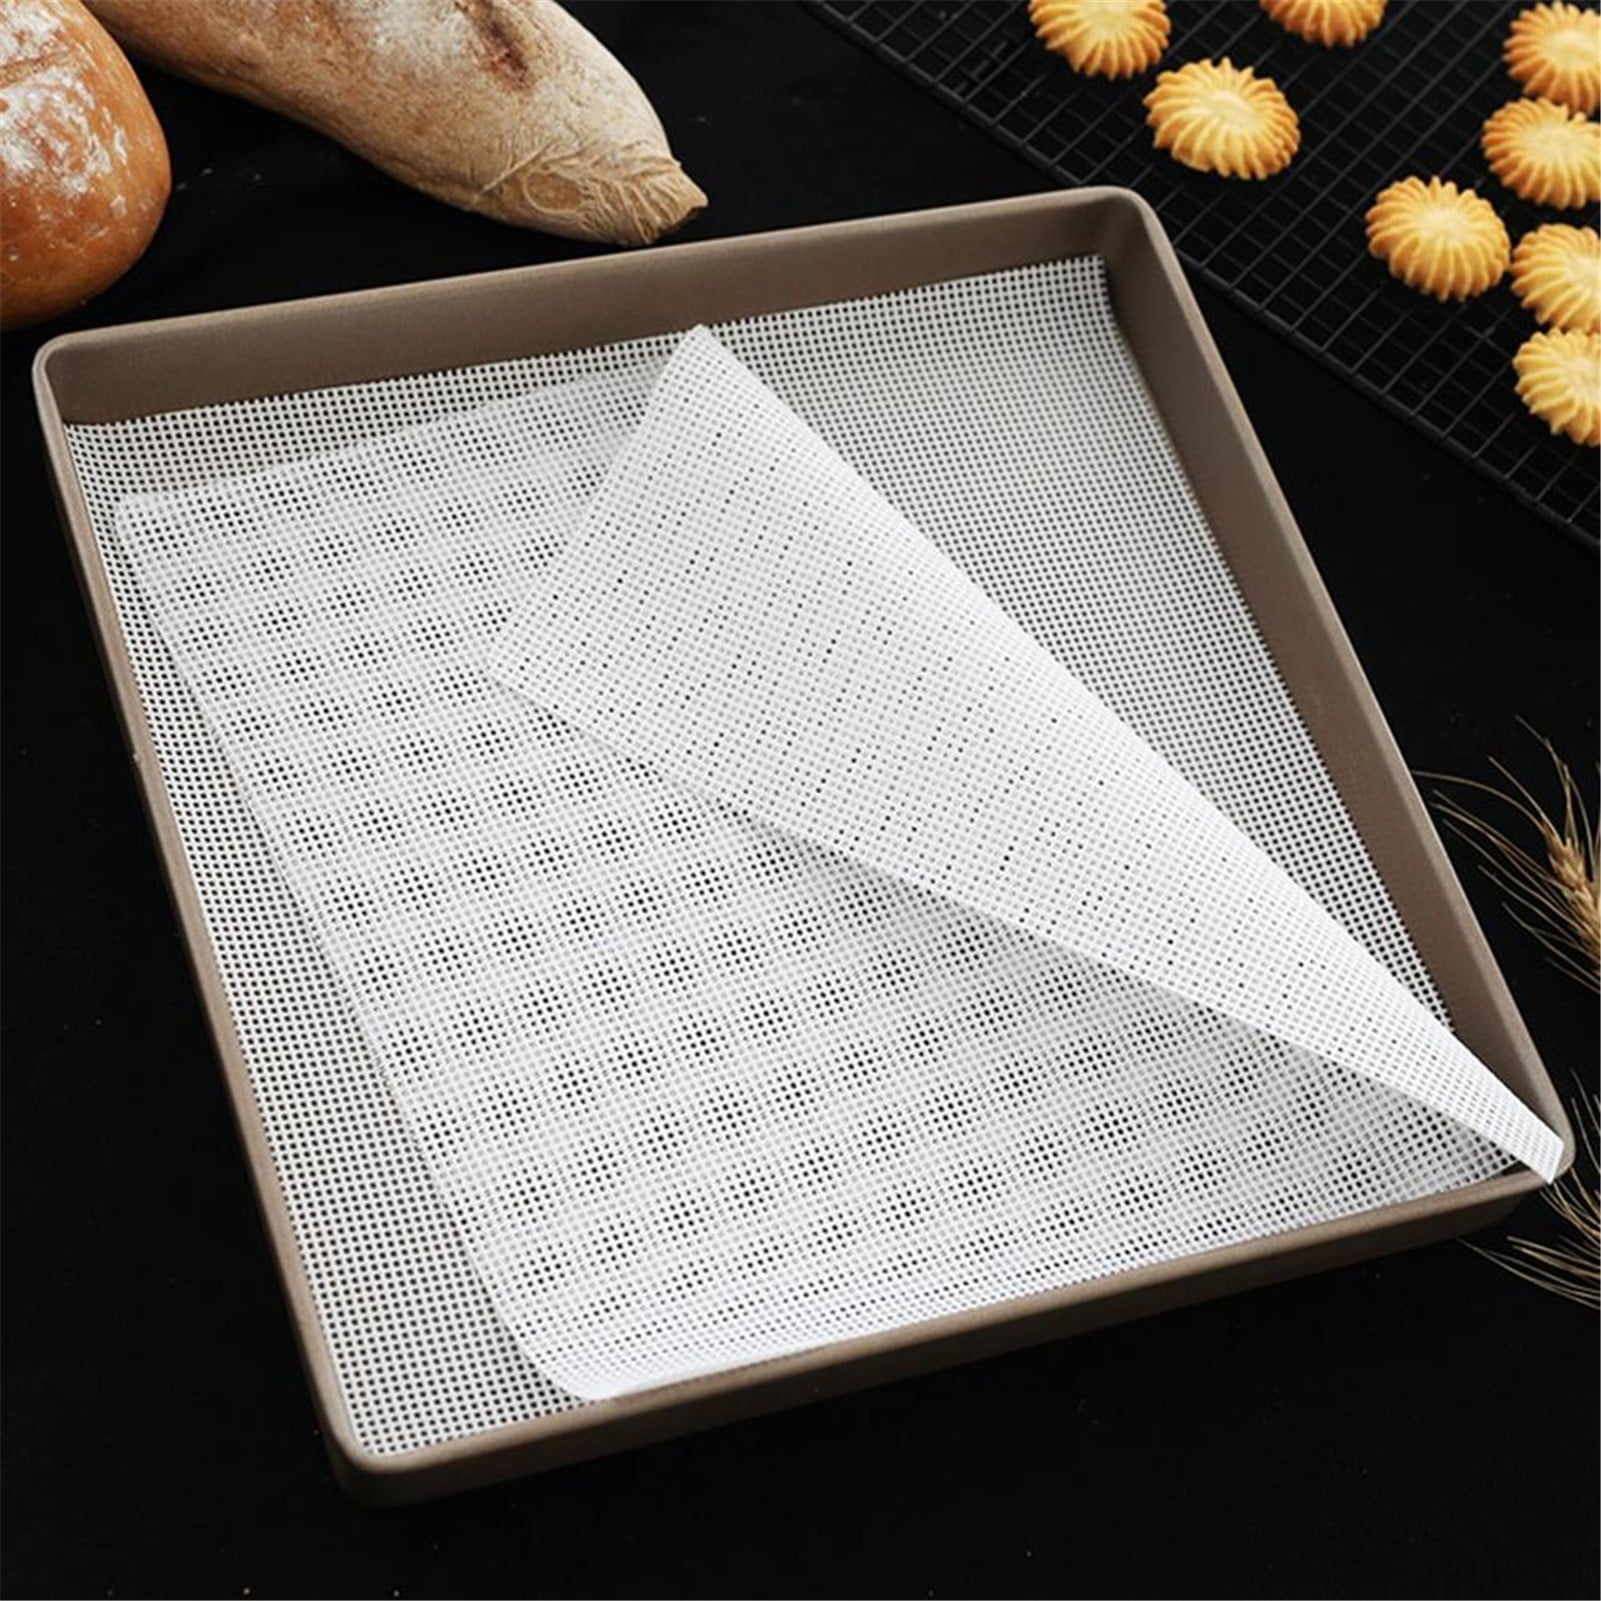 Details about   Soft Cake Roll Silicone Mat Pan Pastry Cookie Kitchen Bake Sheet Pad Baking Tool 